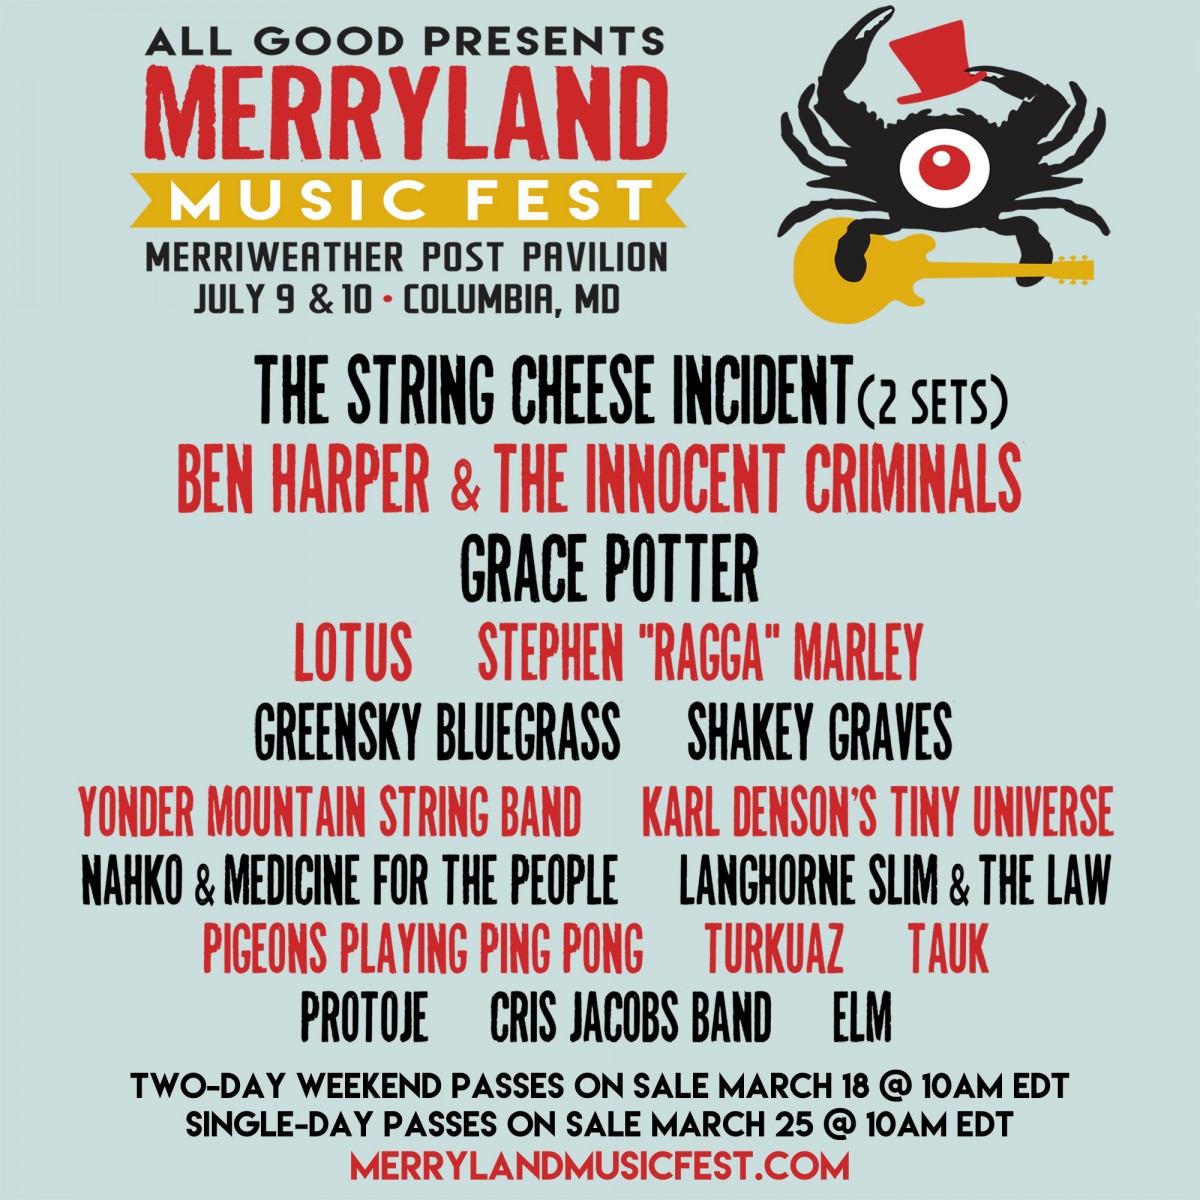 Inaugural Merryland Music Fest Brings Ben Harper & The Innocent Criminals, The String Cheese Incident & many more July 9&10